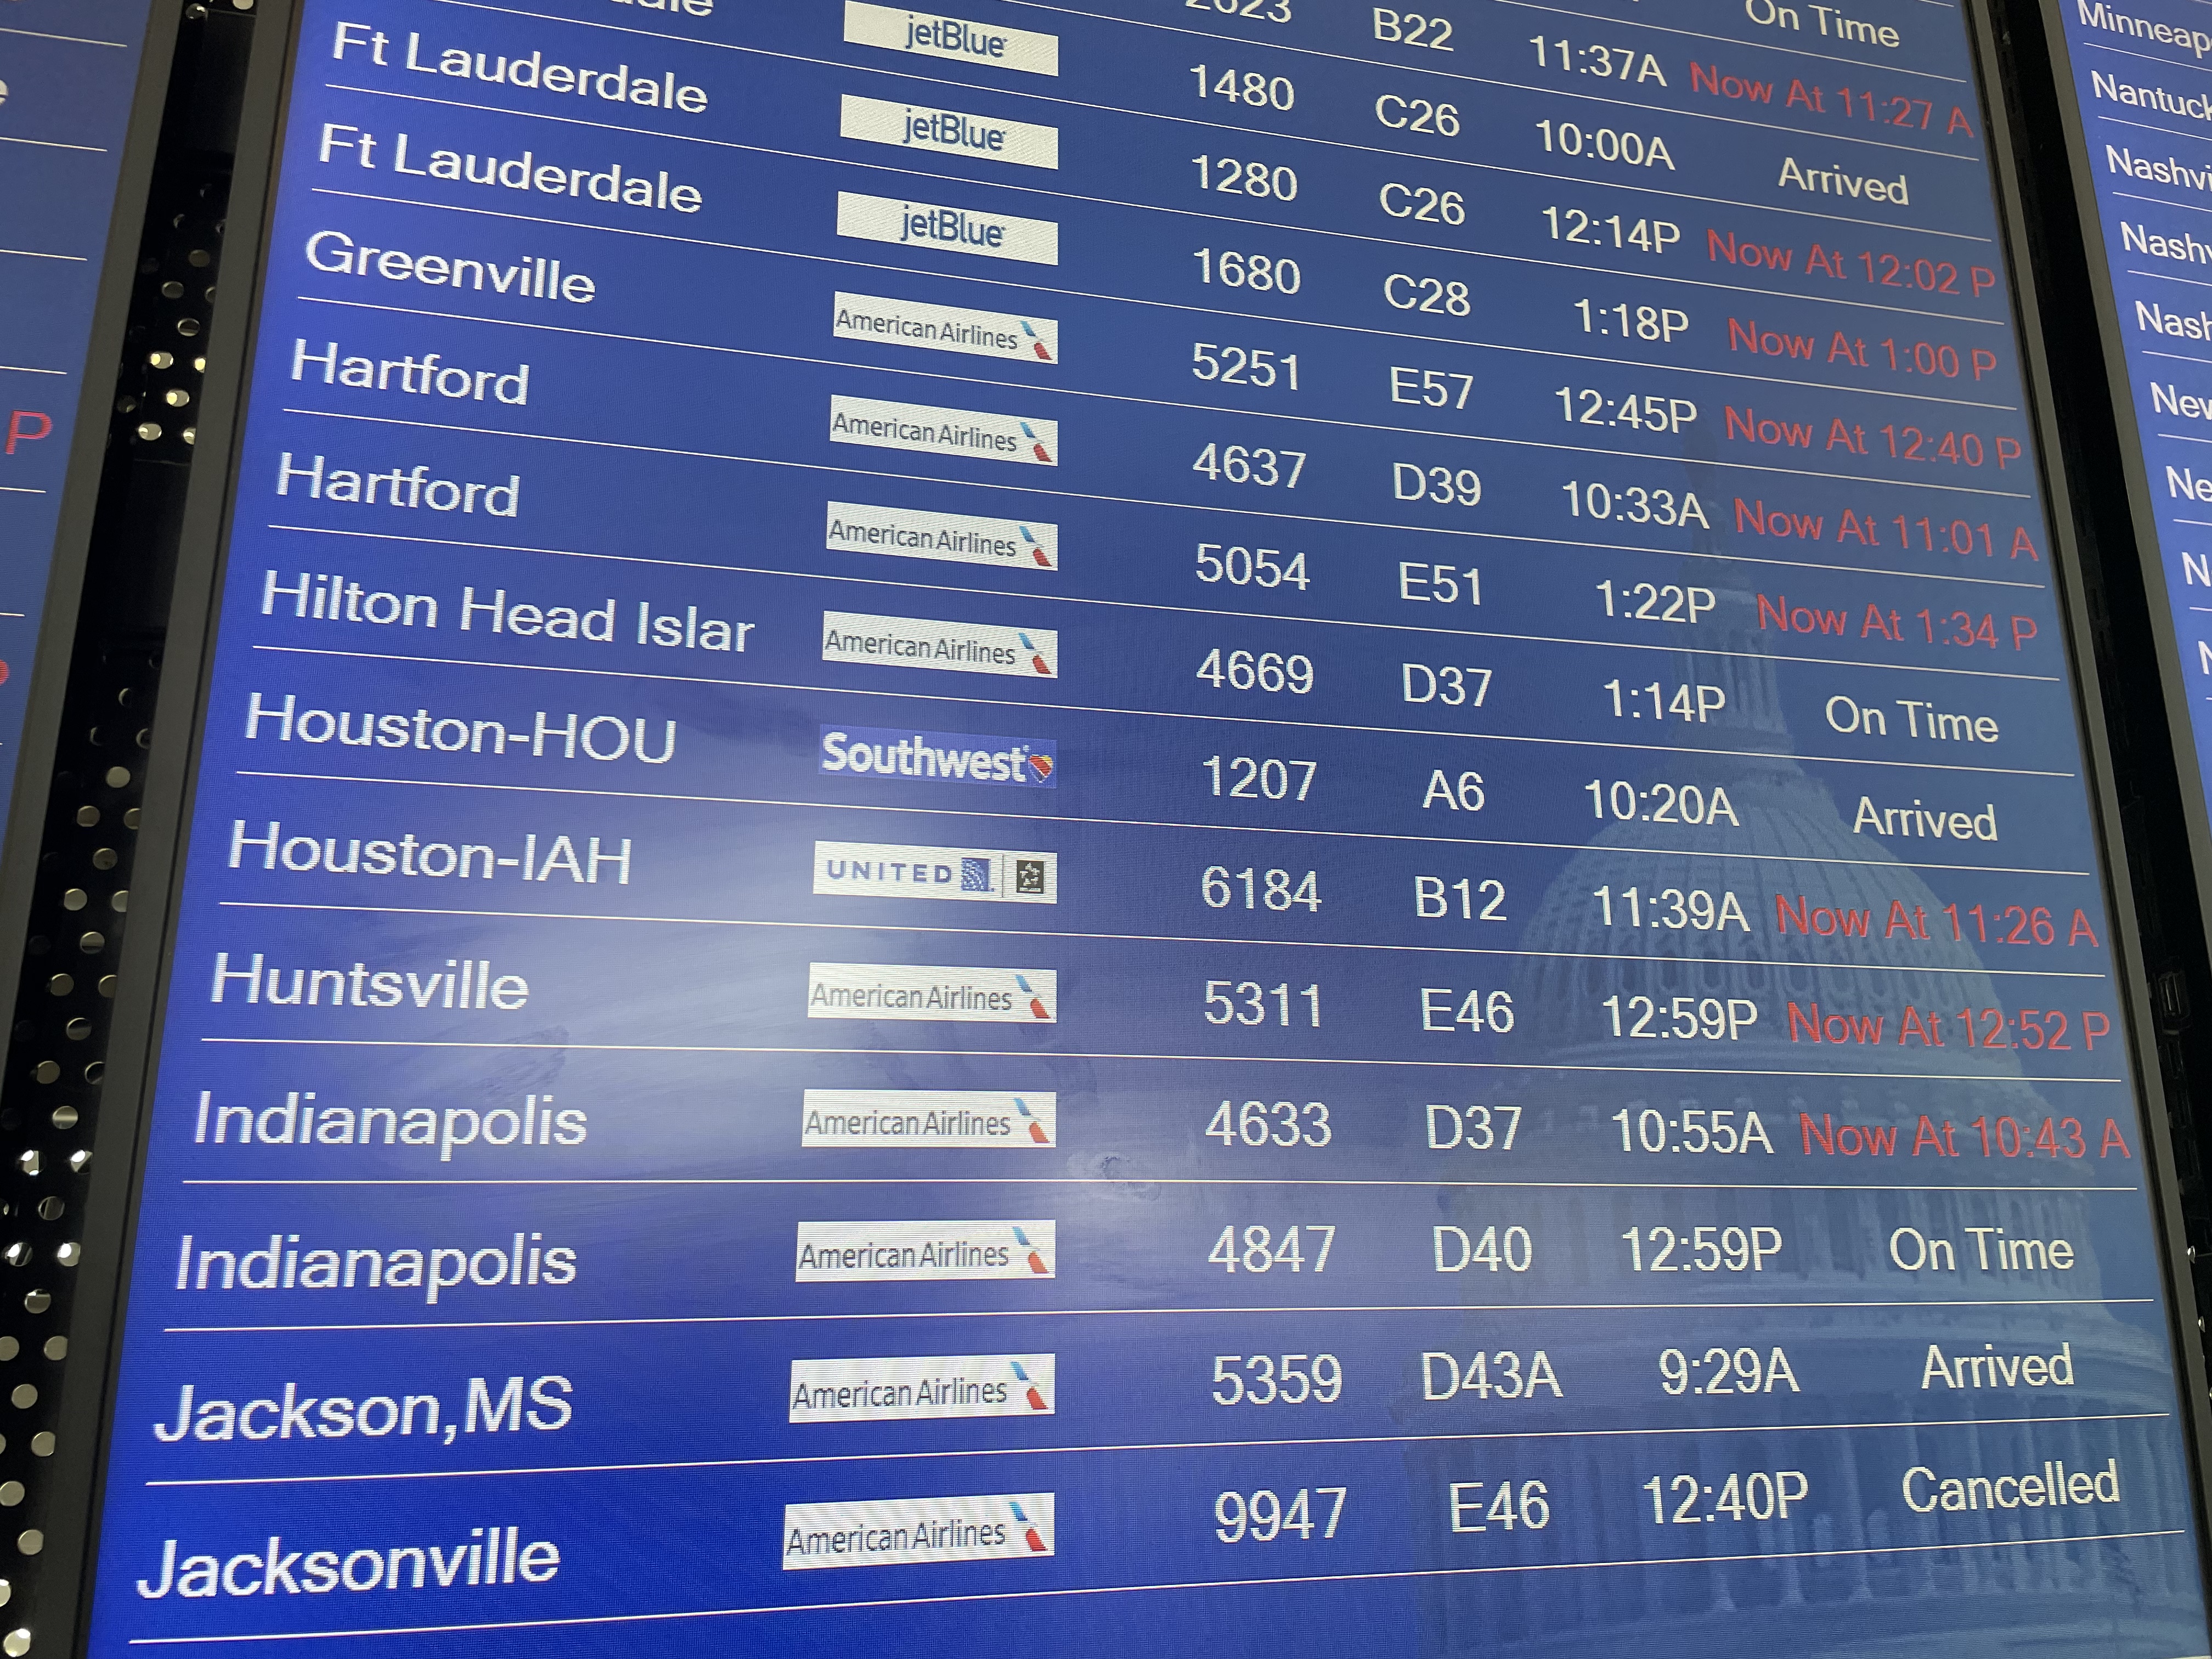 Flightmare: Thousands of flights canceled, delayed, do you need insurance?